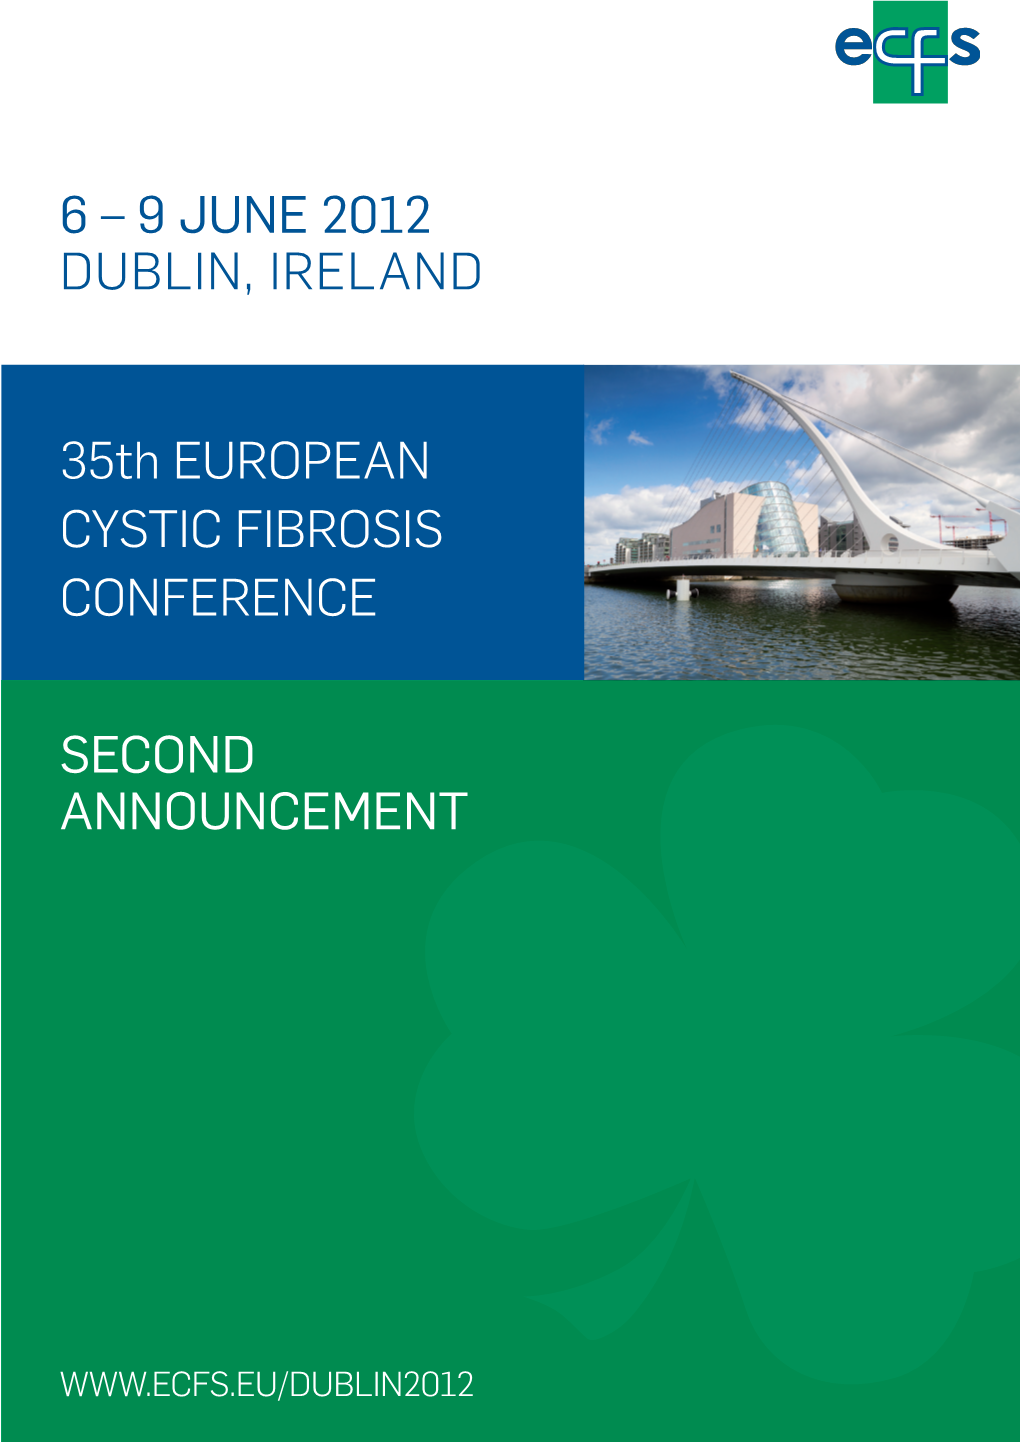 35Th EUROPEAN CYSTIC FIBROSIS CONFERENCE 6 – 9 JUNE 2012